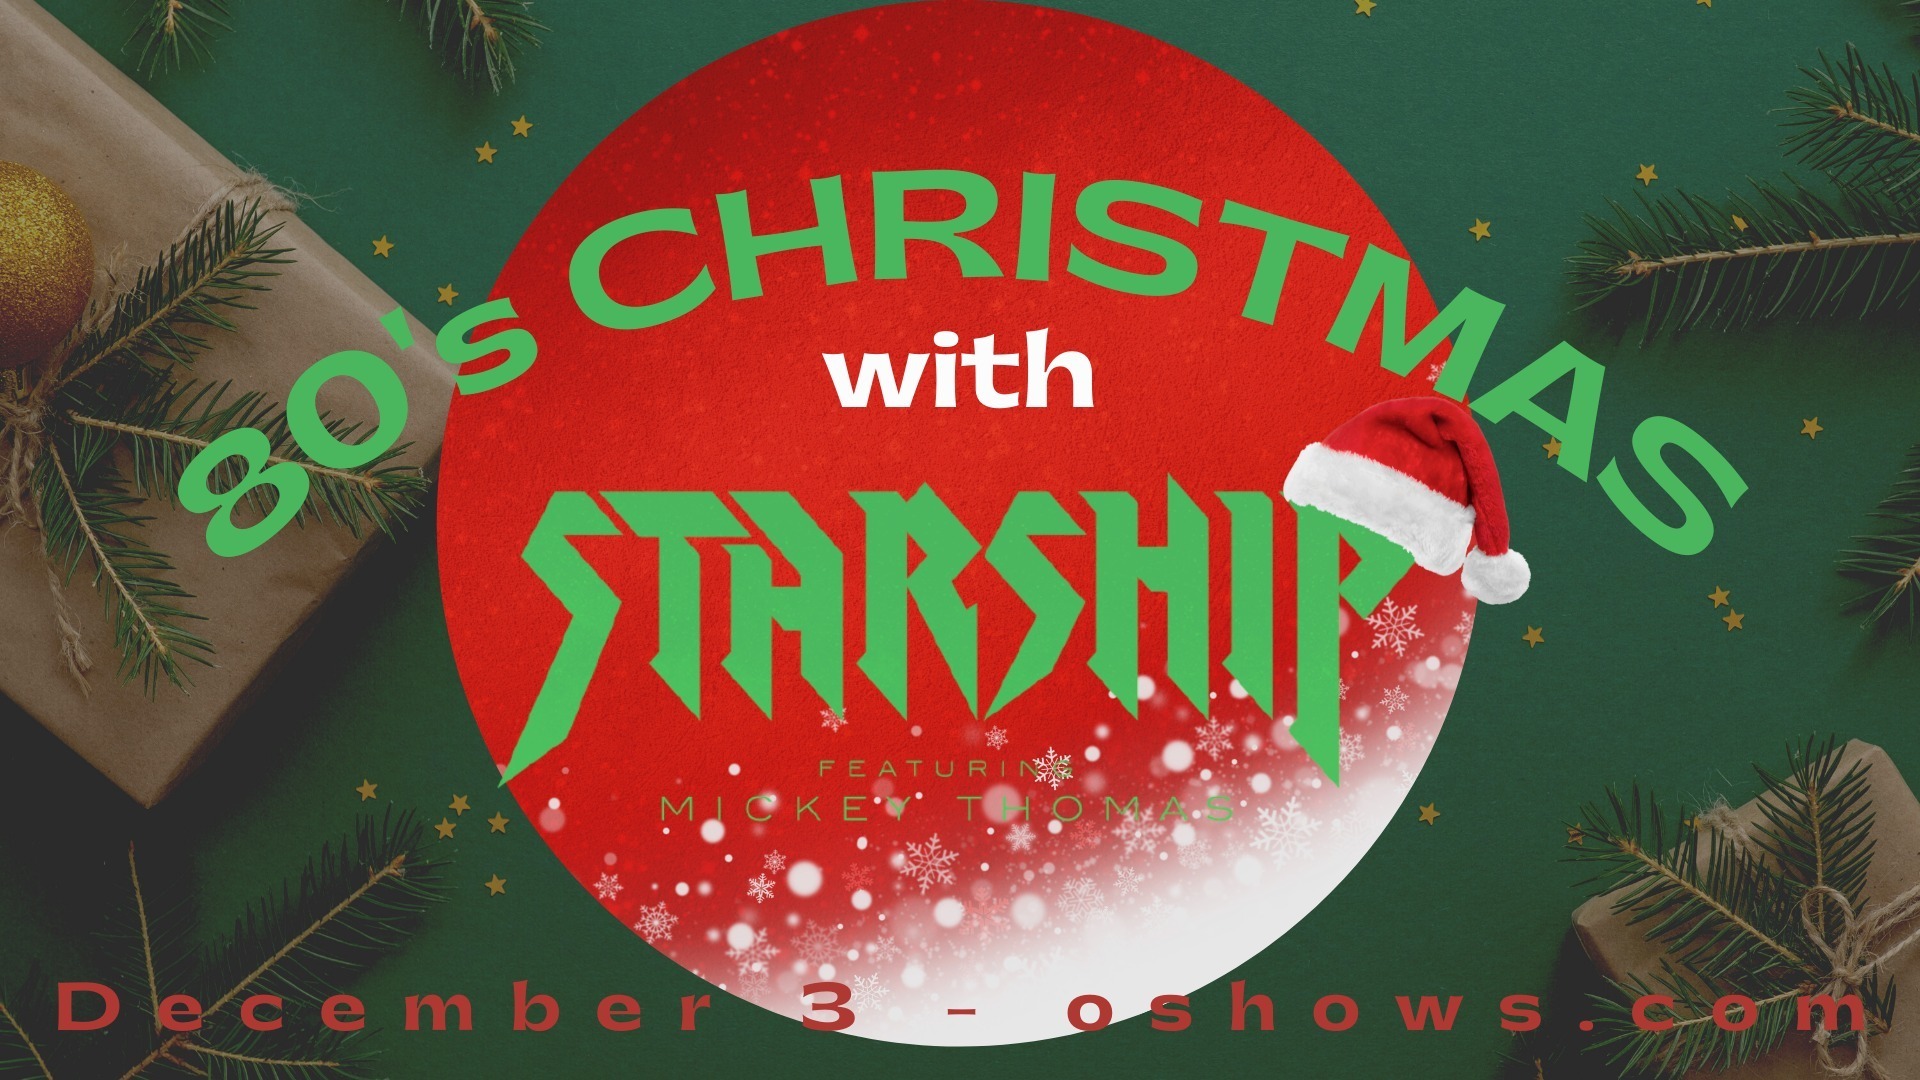 80's Christmas with Starship Ft. Micky Thomas at Des Plaines Theatre, December 3, 2022 Chicago, Des Plaines, Illinois, United States